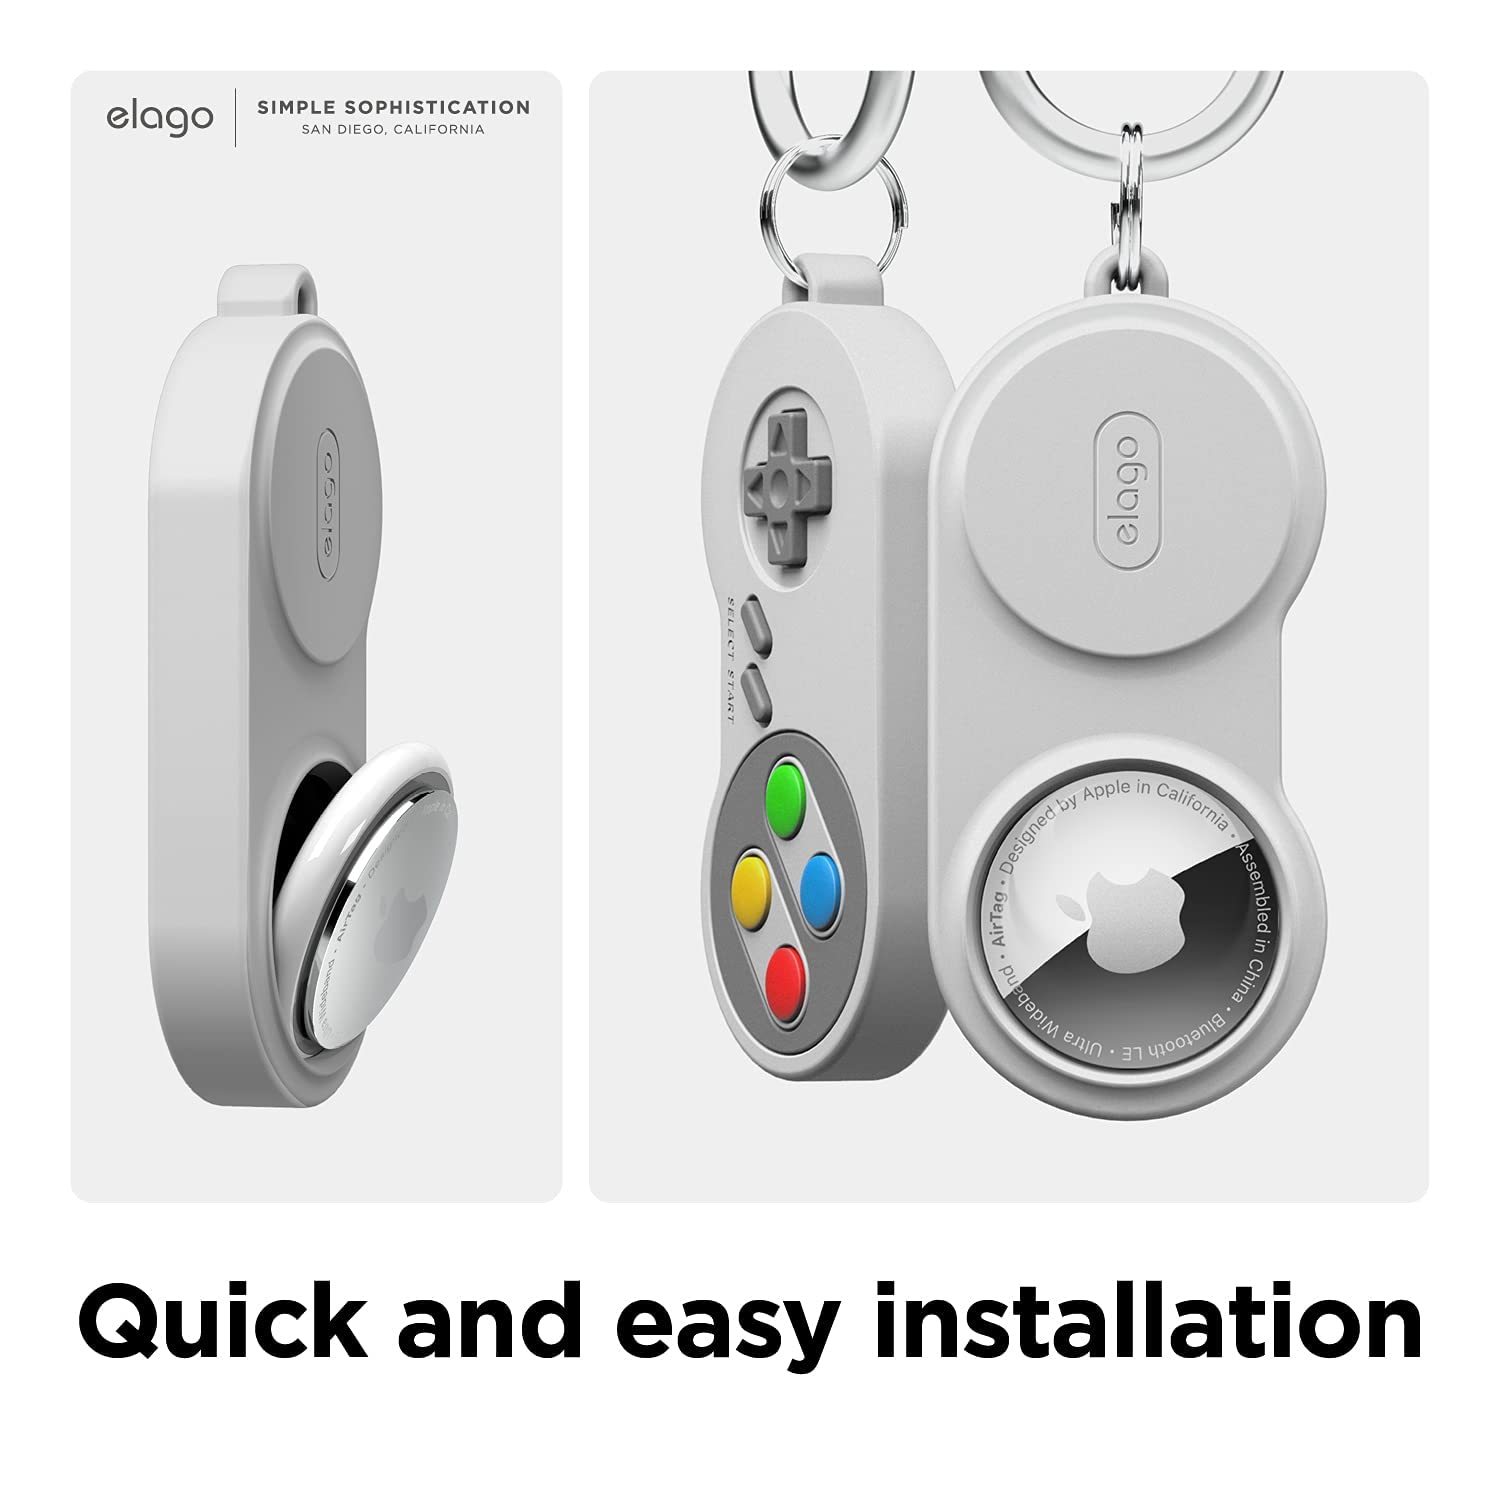 elago W5 Case Keychain Compatible with Apple AirTags - (Track Dogs, Keys, Backpacks, Purses, Golf Rangefinders) Tracking Device Not Included - amzGamess